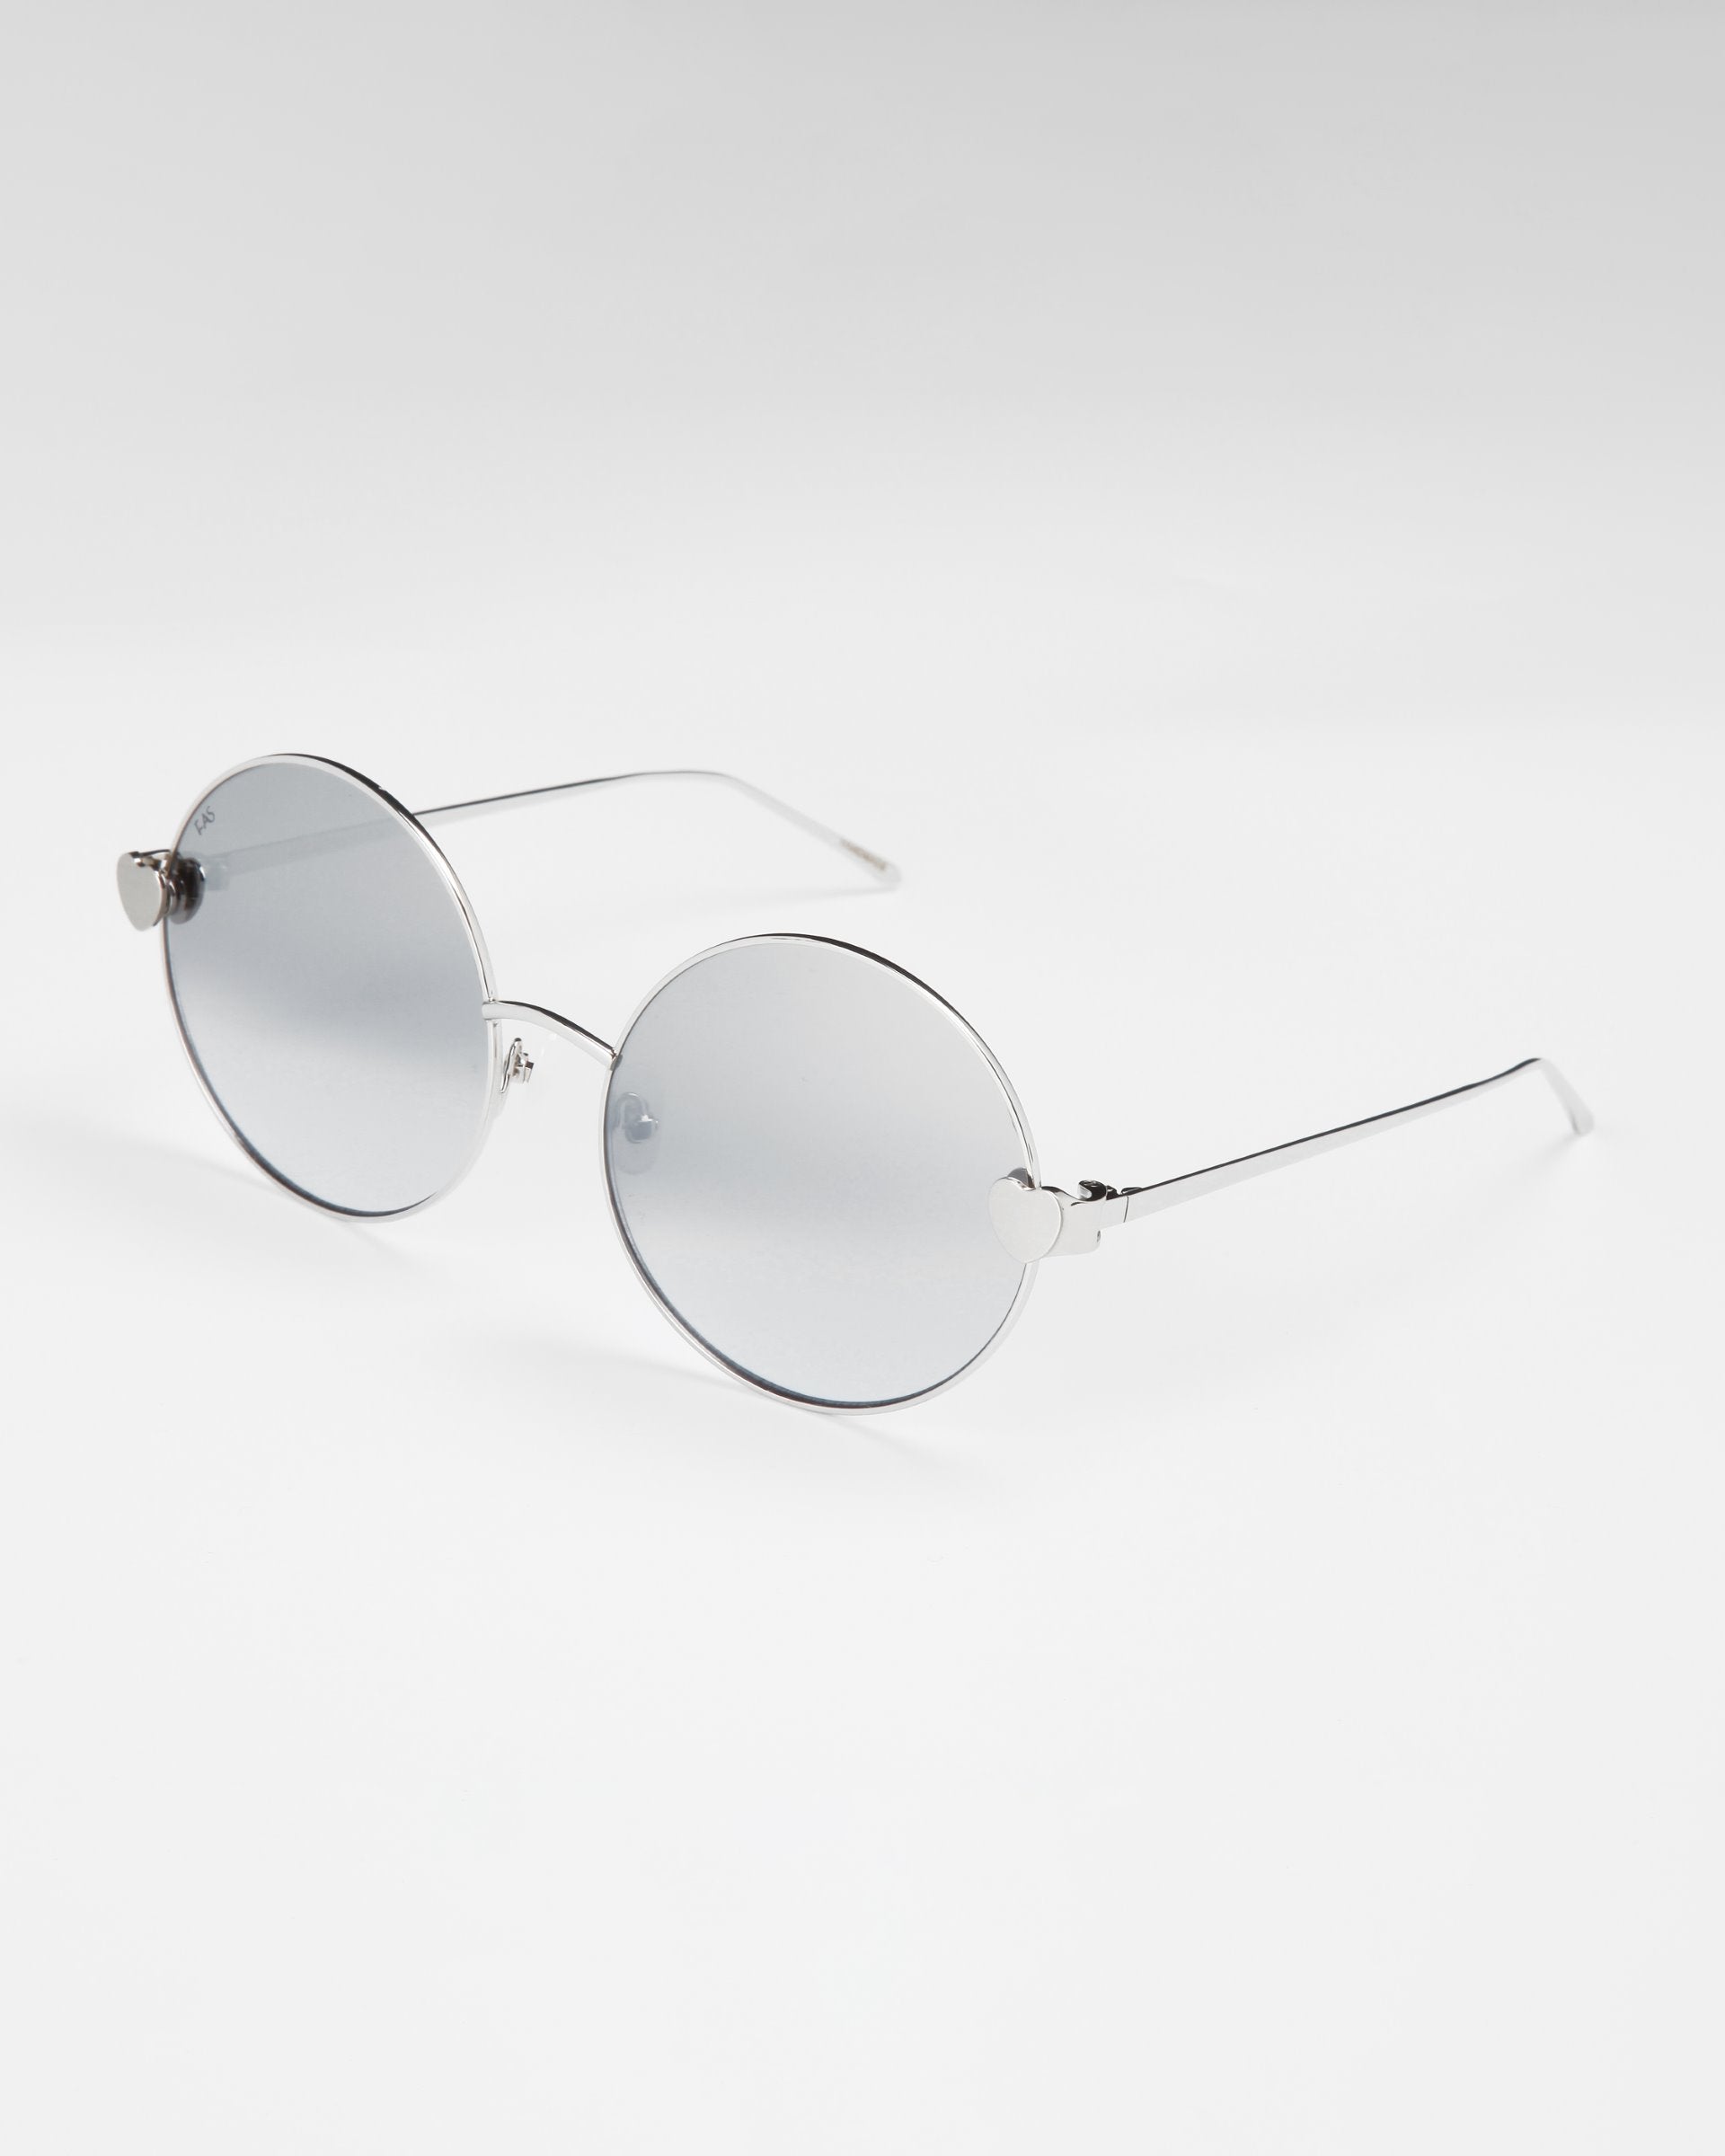 A pair of round, silver-framed sunglasses with light gray lenses is set against a white background. The frames are thin and minimalist, with slightly curved temples and jadestone nose pads. These For Art&#39;s Sake® Love Story shades also offer 100% UV protection for both style and safety.